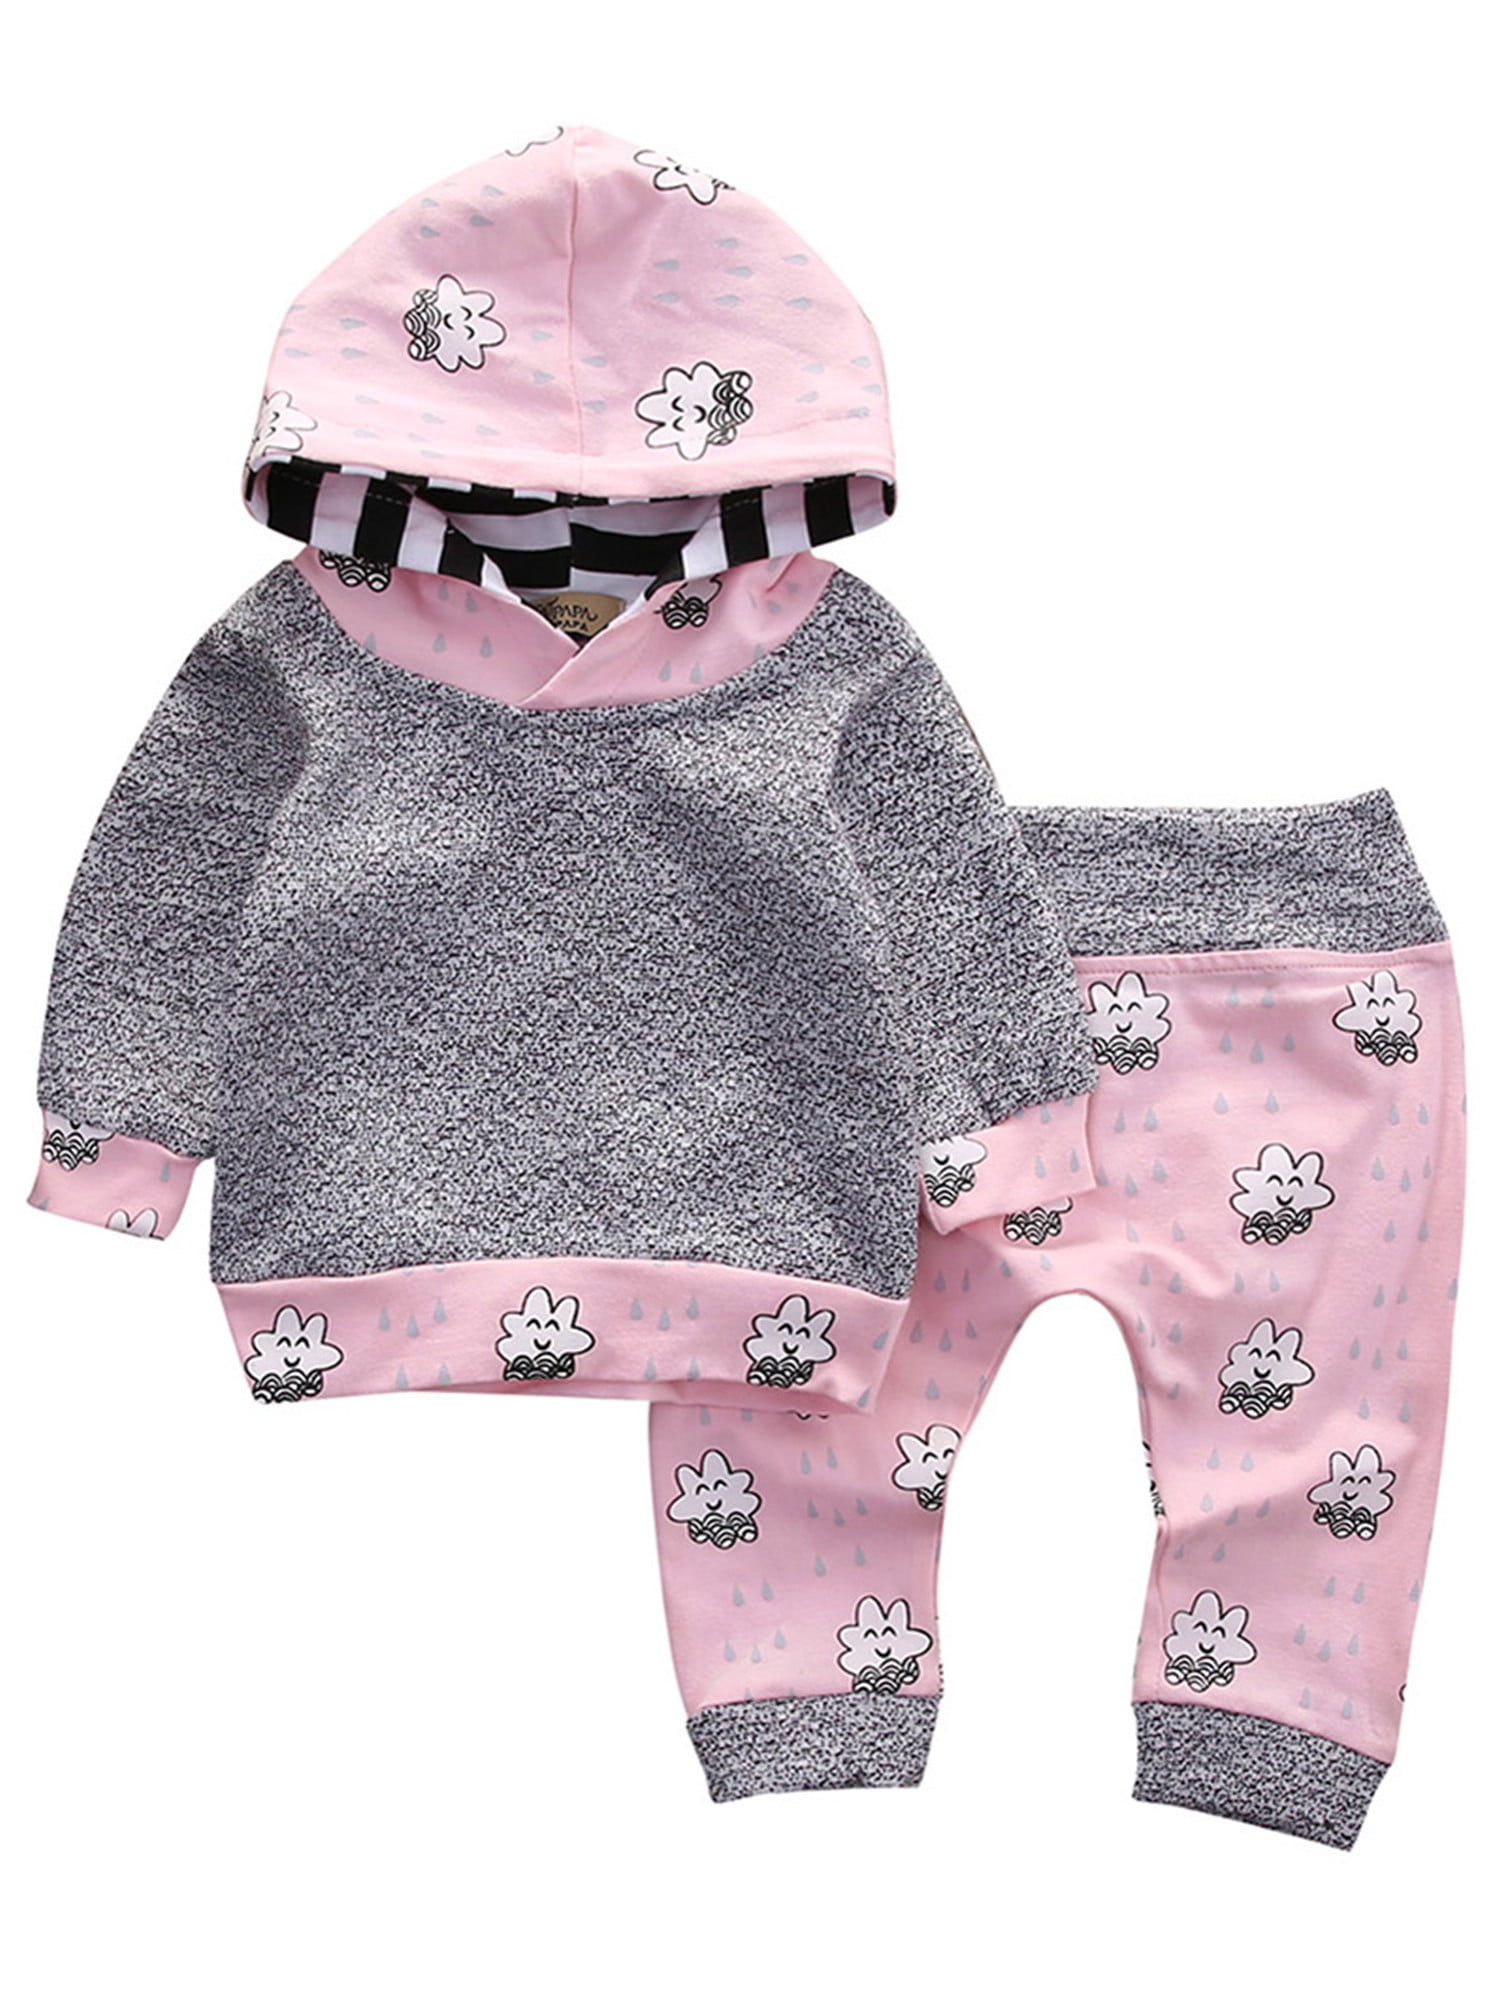 Warm Toddler Infant Baby Boy Girl Clothes Set Floral Hoodie Tops+Pants Outfits 